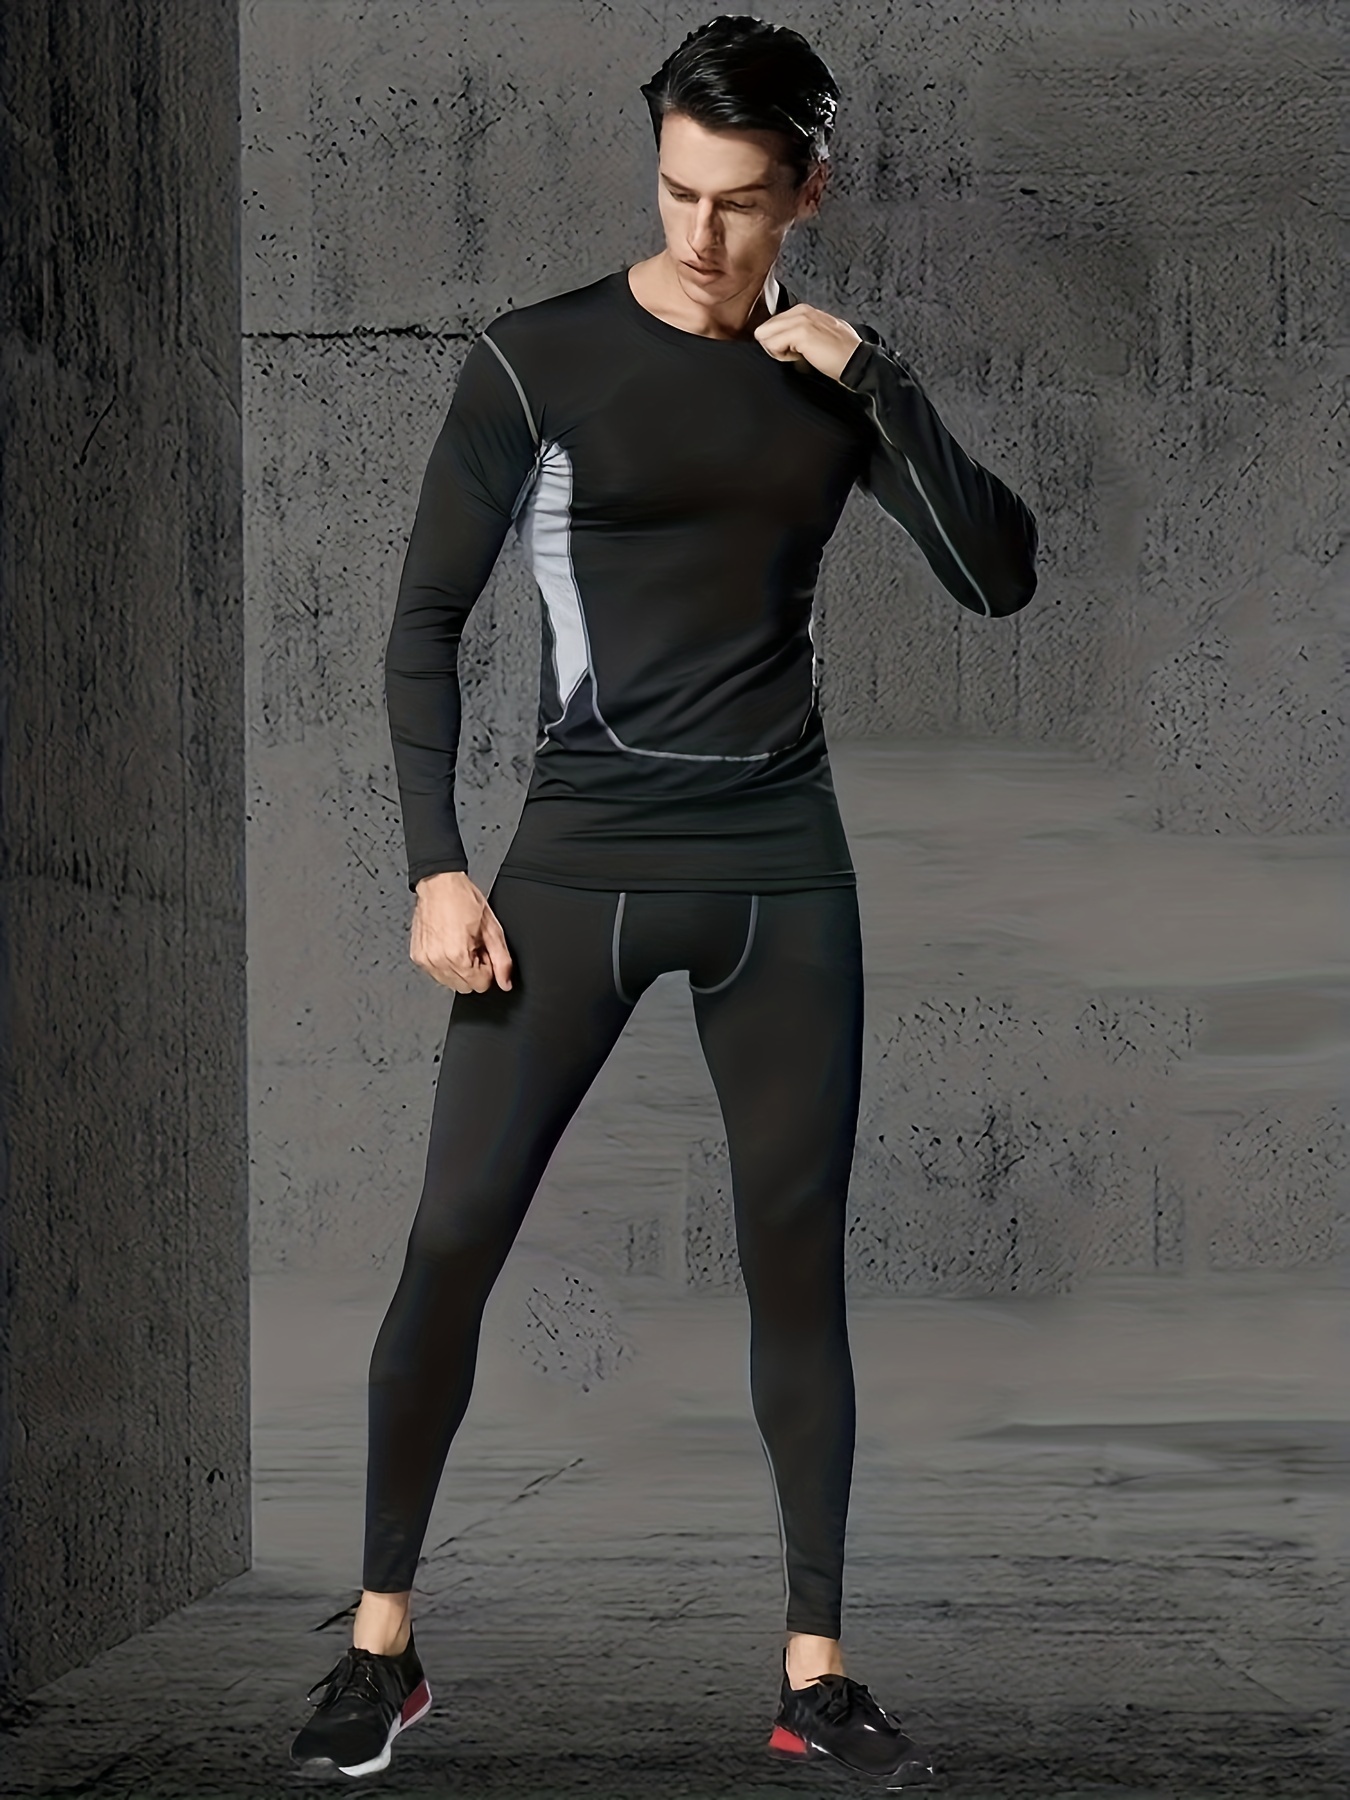  New Men's Sports Running Set Compression Shirt Pants Skin-Tight  Long Sleeves Quick Dry Fitness Tracksuit Gym Yoga Suits (1,S) : Clothing,  Shoes & Jewelry